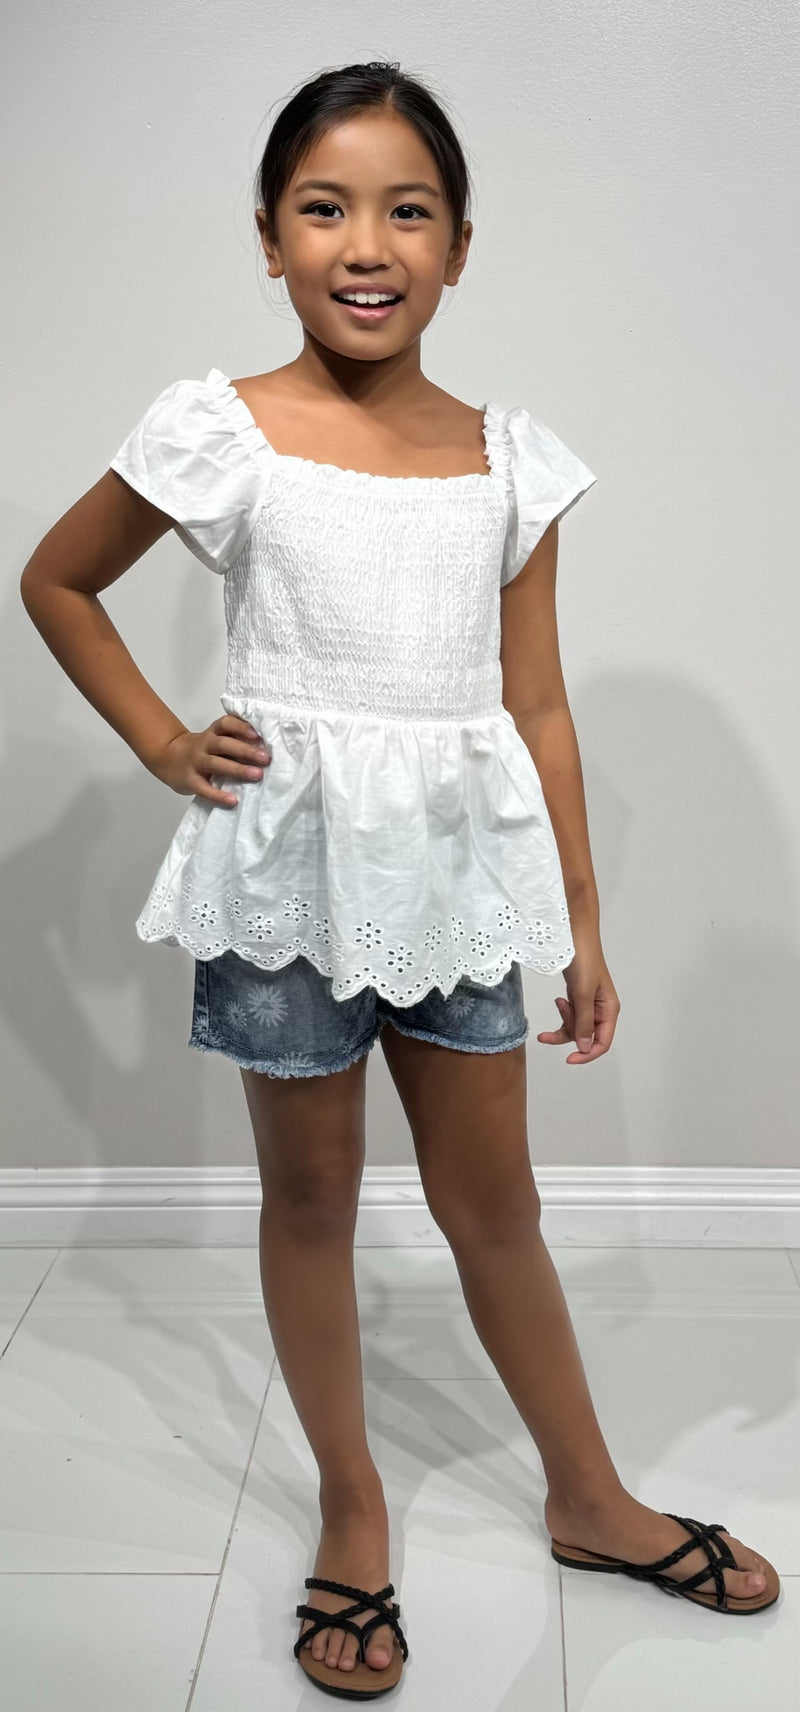 Jeans Warehouse Hawaii - S/S SOLID TOPS 7-16 - WANT IT ALL TOP | KIDS SIZE 7-16 | By STAR RIDE KIDS